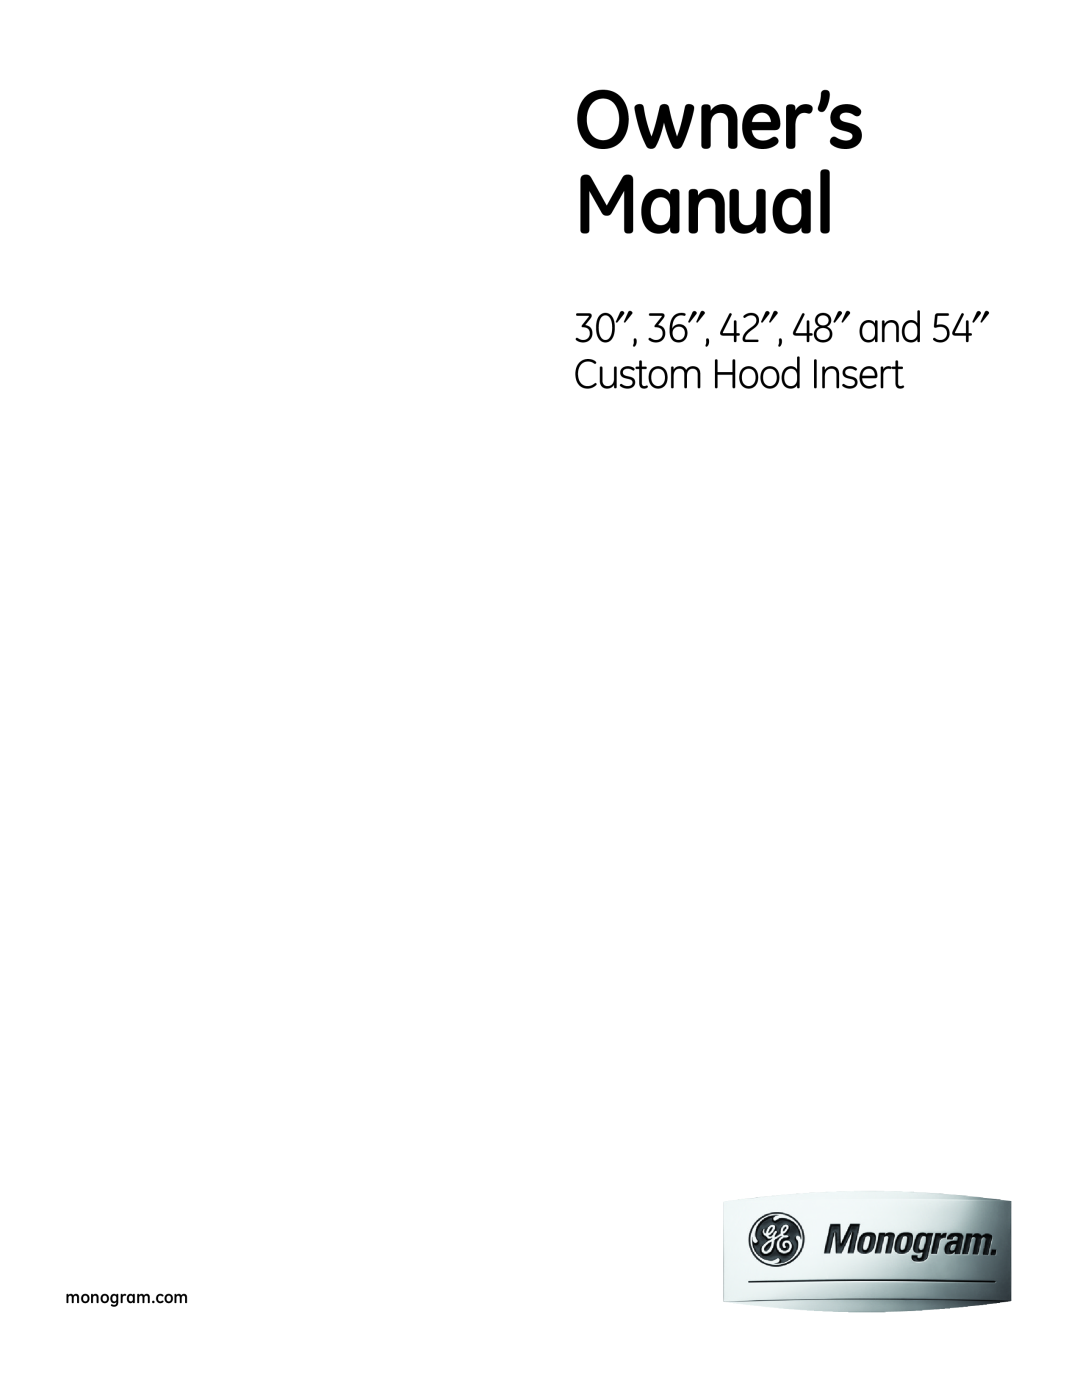 GE 48, 42 owner manual Operating Instructions, Installation Instructions, Troubleshooting Tips, Consumer Support 